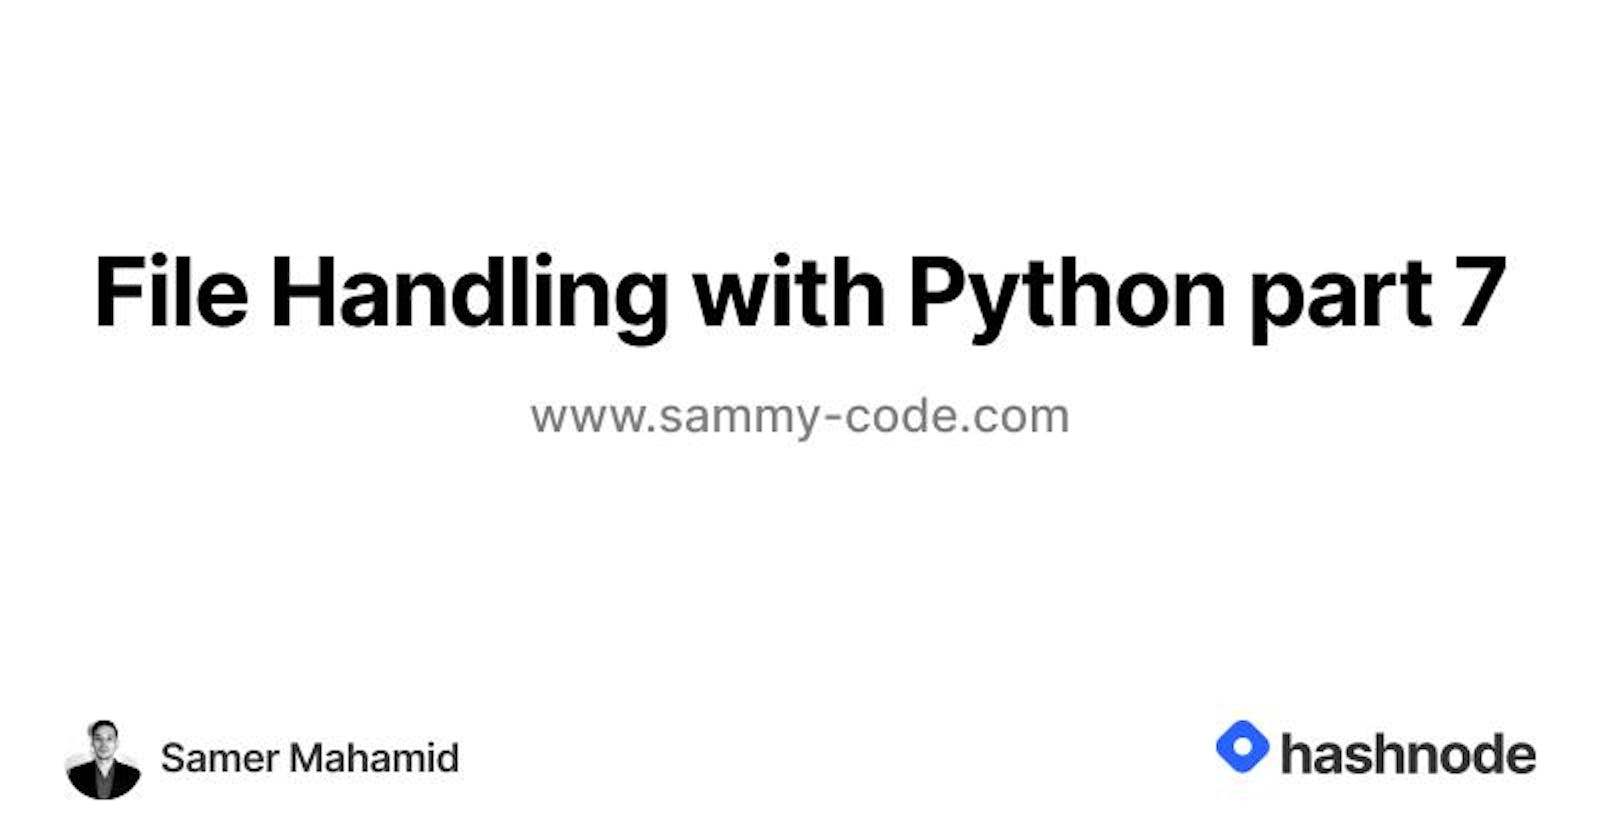 File Handling with Python Part 7